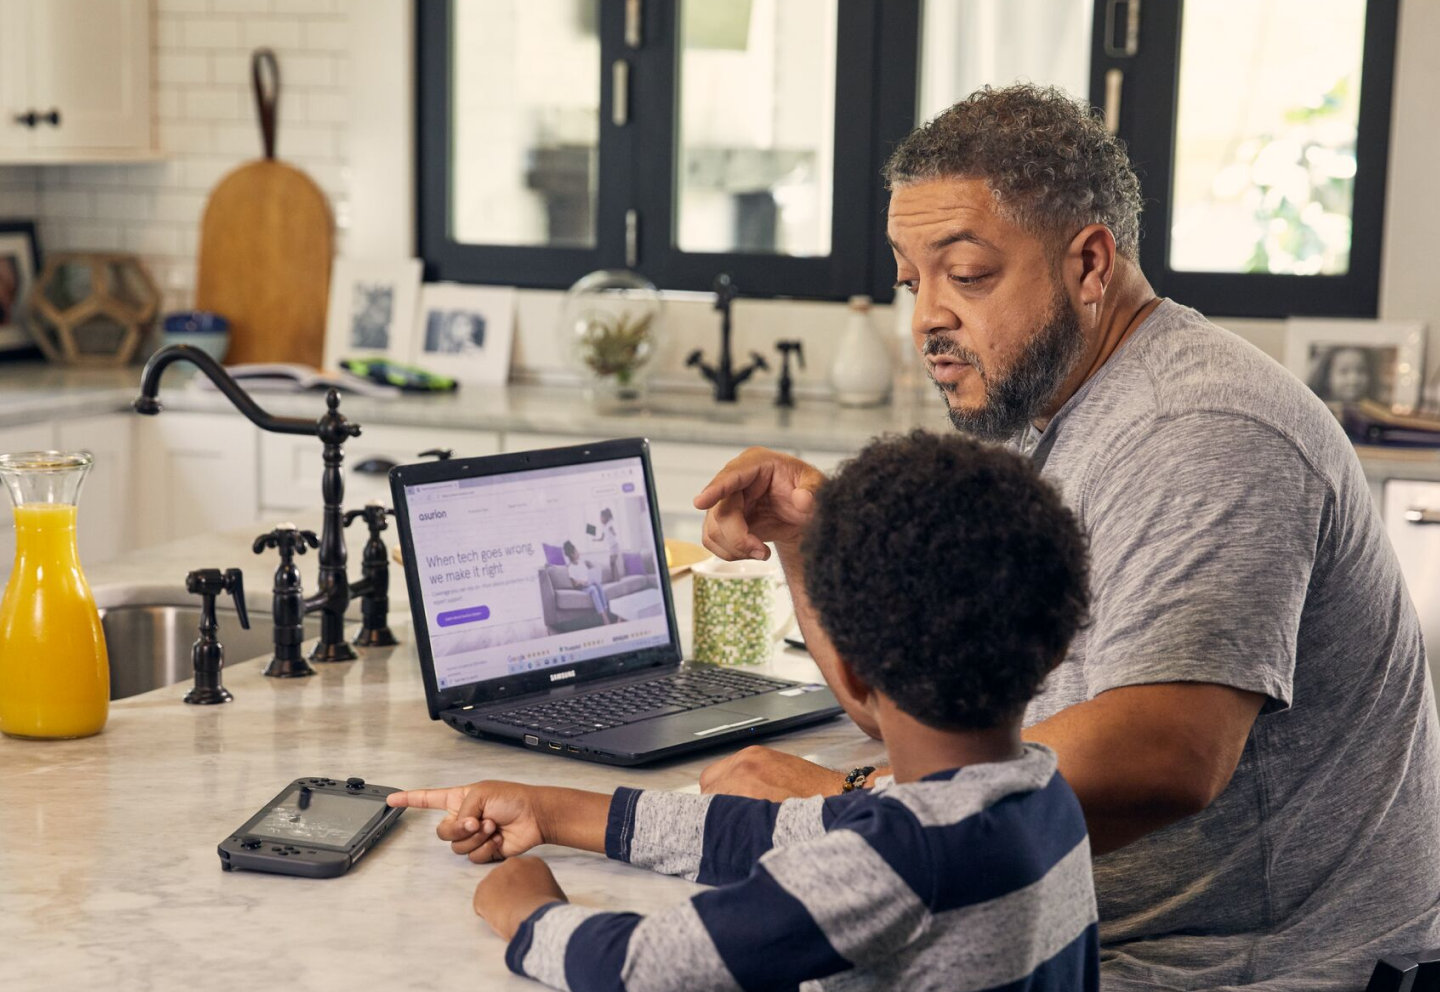 Man and child using a laptop on a kitchen counter